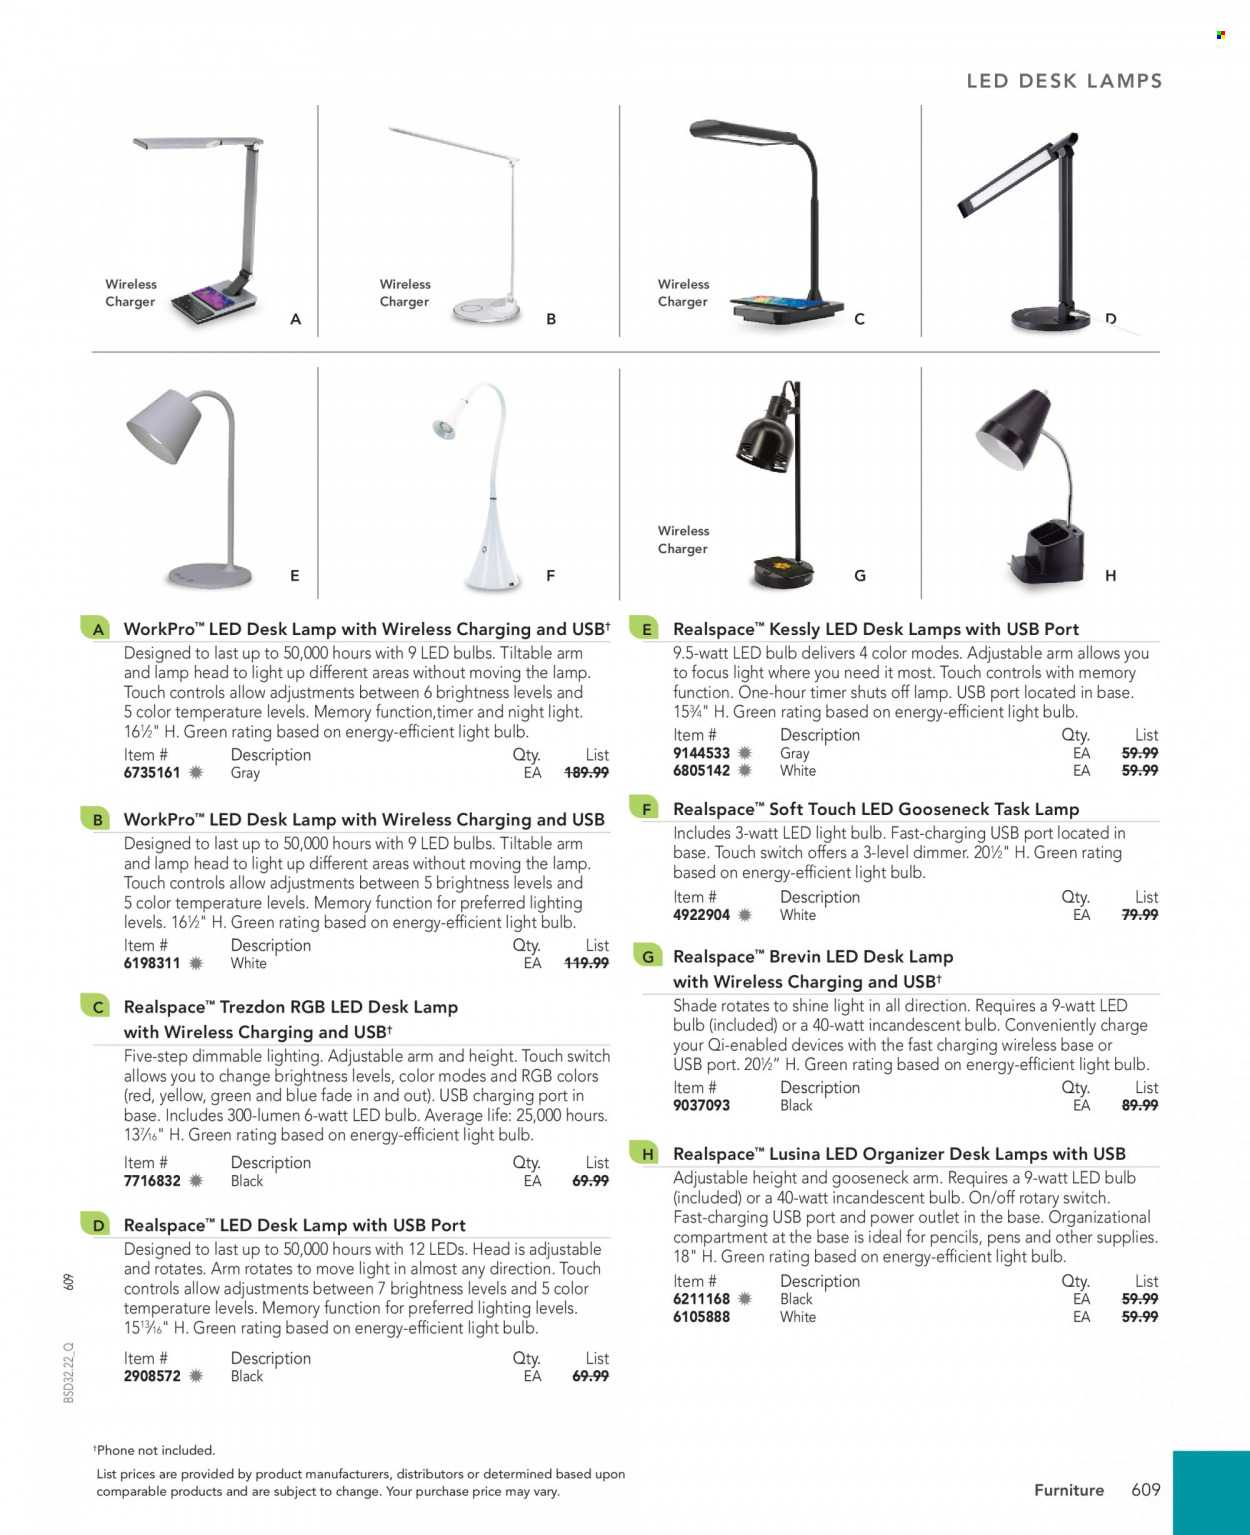 thumbnail - Office DEPOT Flyer - Sales products - pencil, LED bulb, light bulb, wireless charger, desk. Page 609.